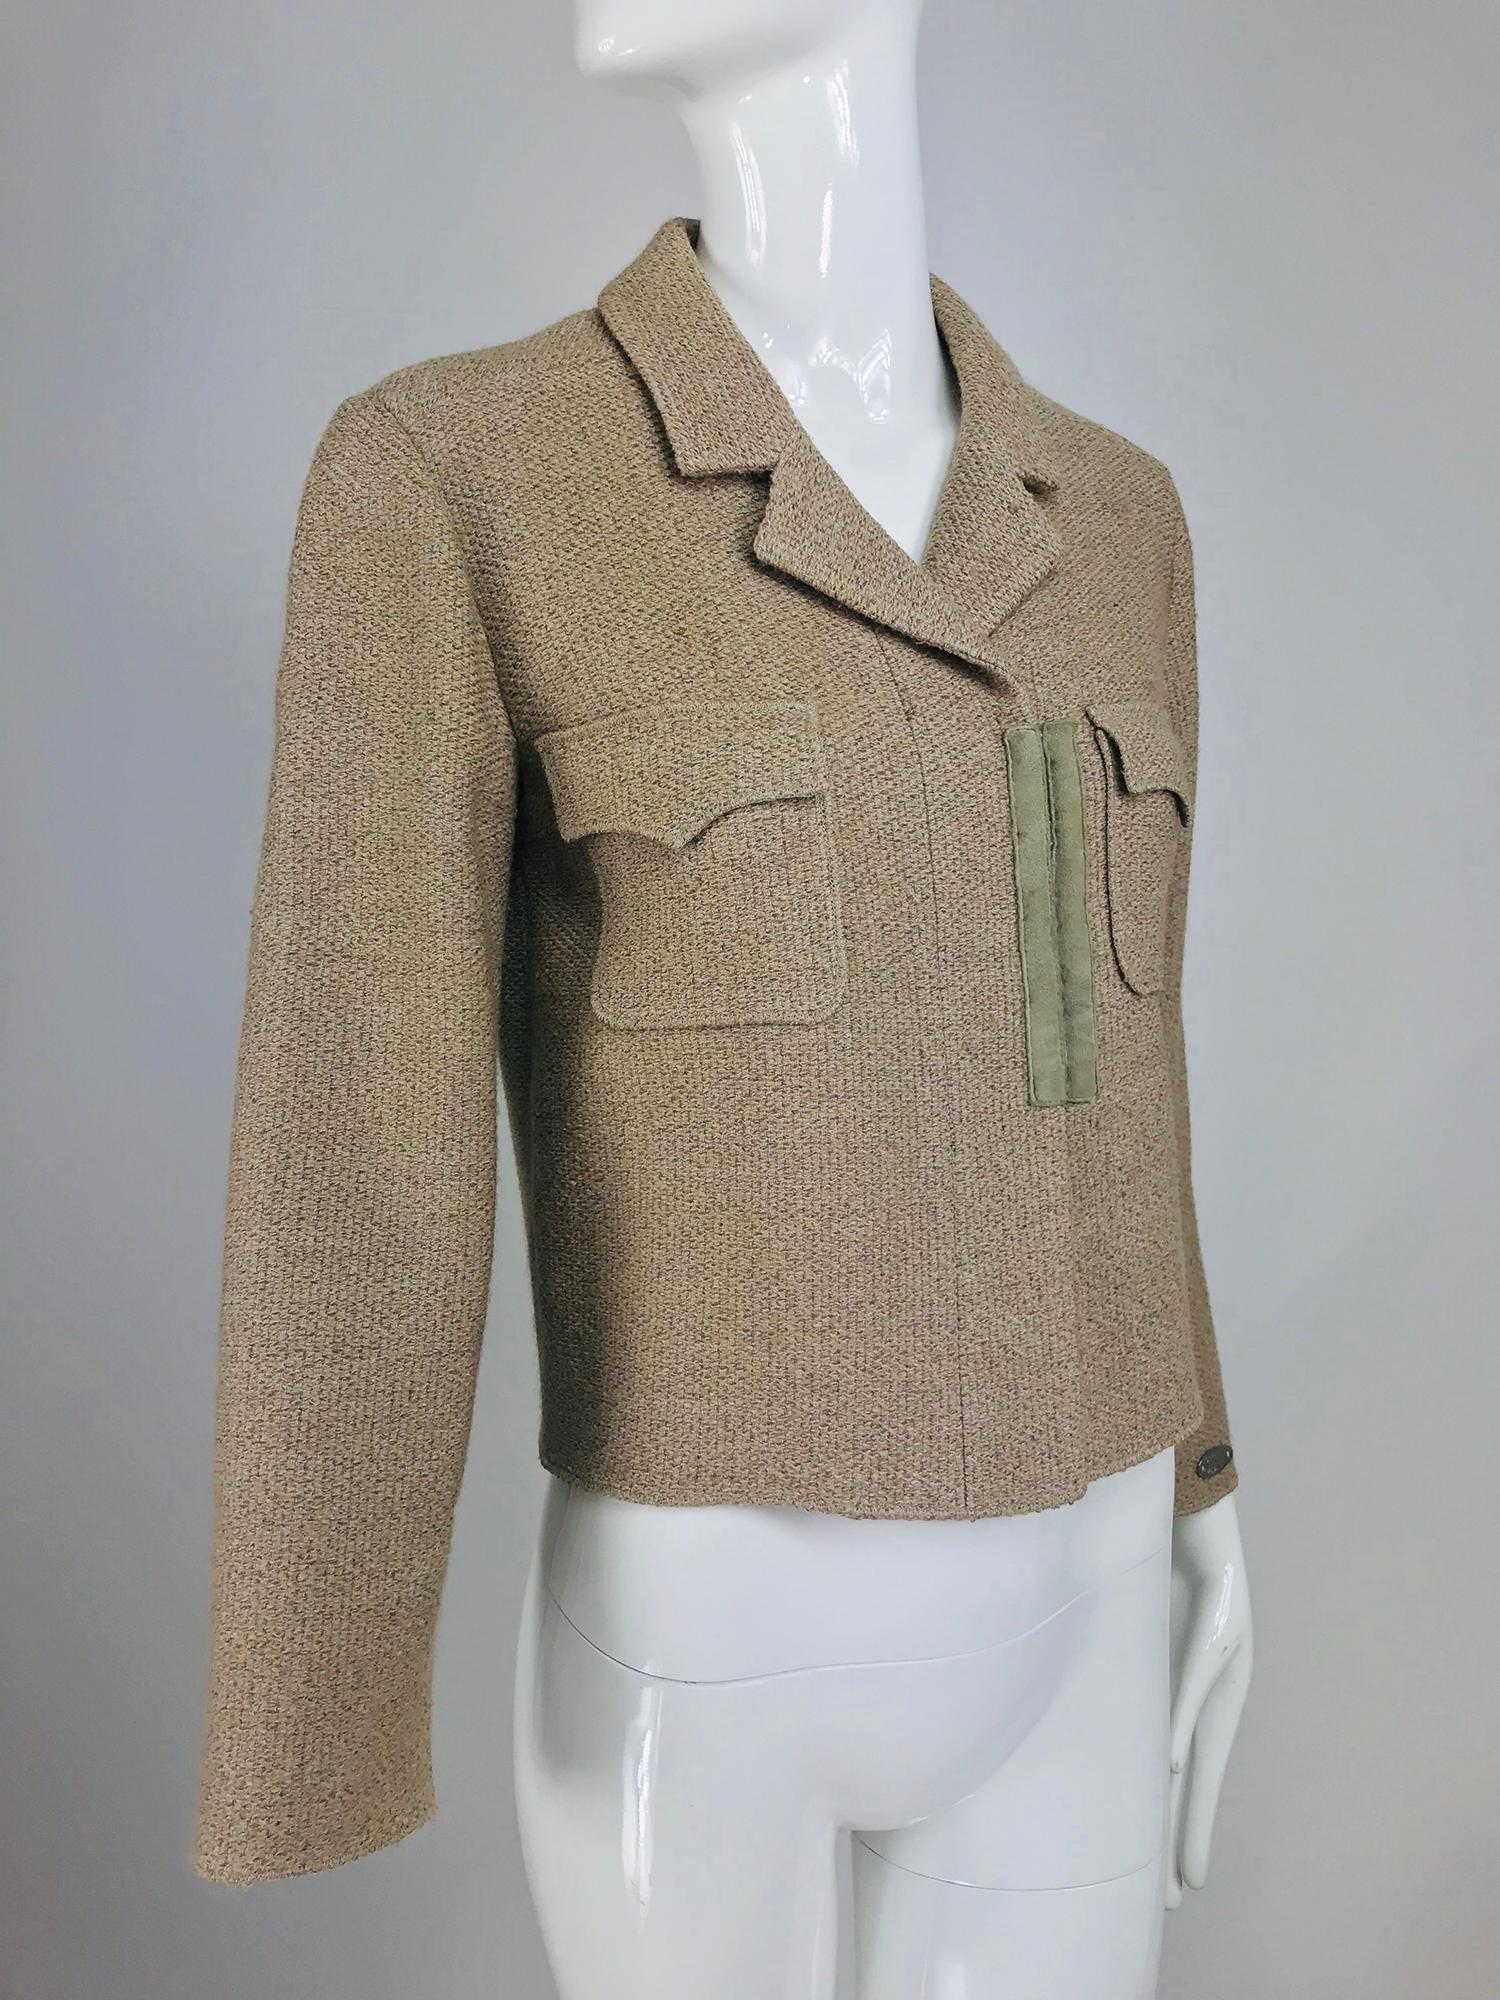 Chanel Beige Double Pocket Hook Front Unlined Jacket 02A. Great jacket to to pair with jeans or anything casual. This jacket closes at the front with hidden logo hooks and a single hidden logo button you see at the front vertical bands of taupe